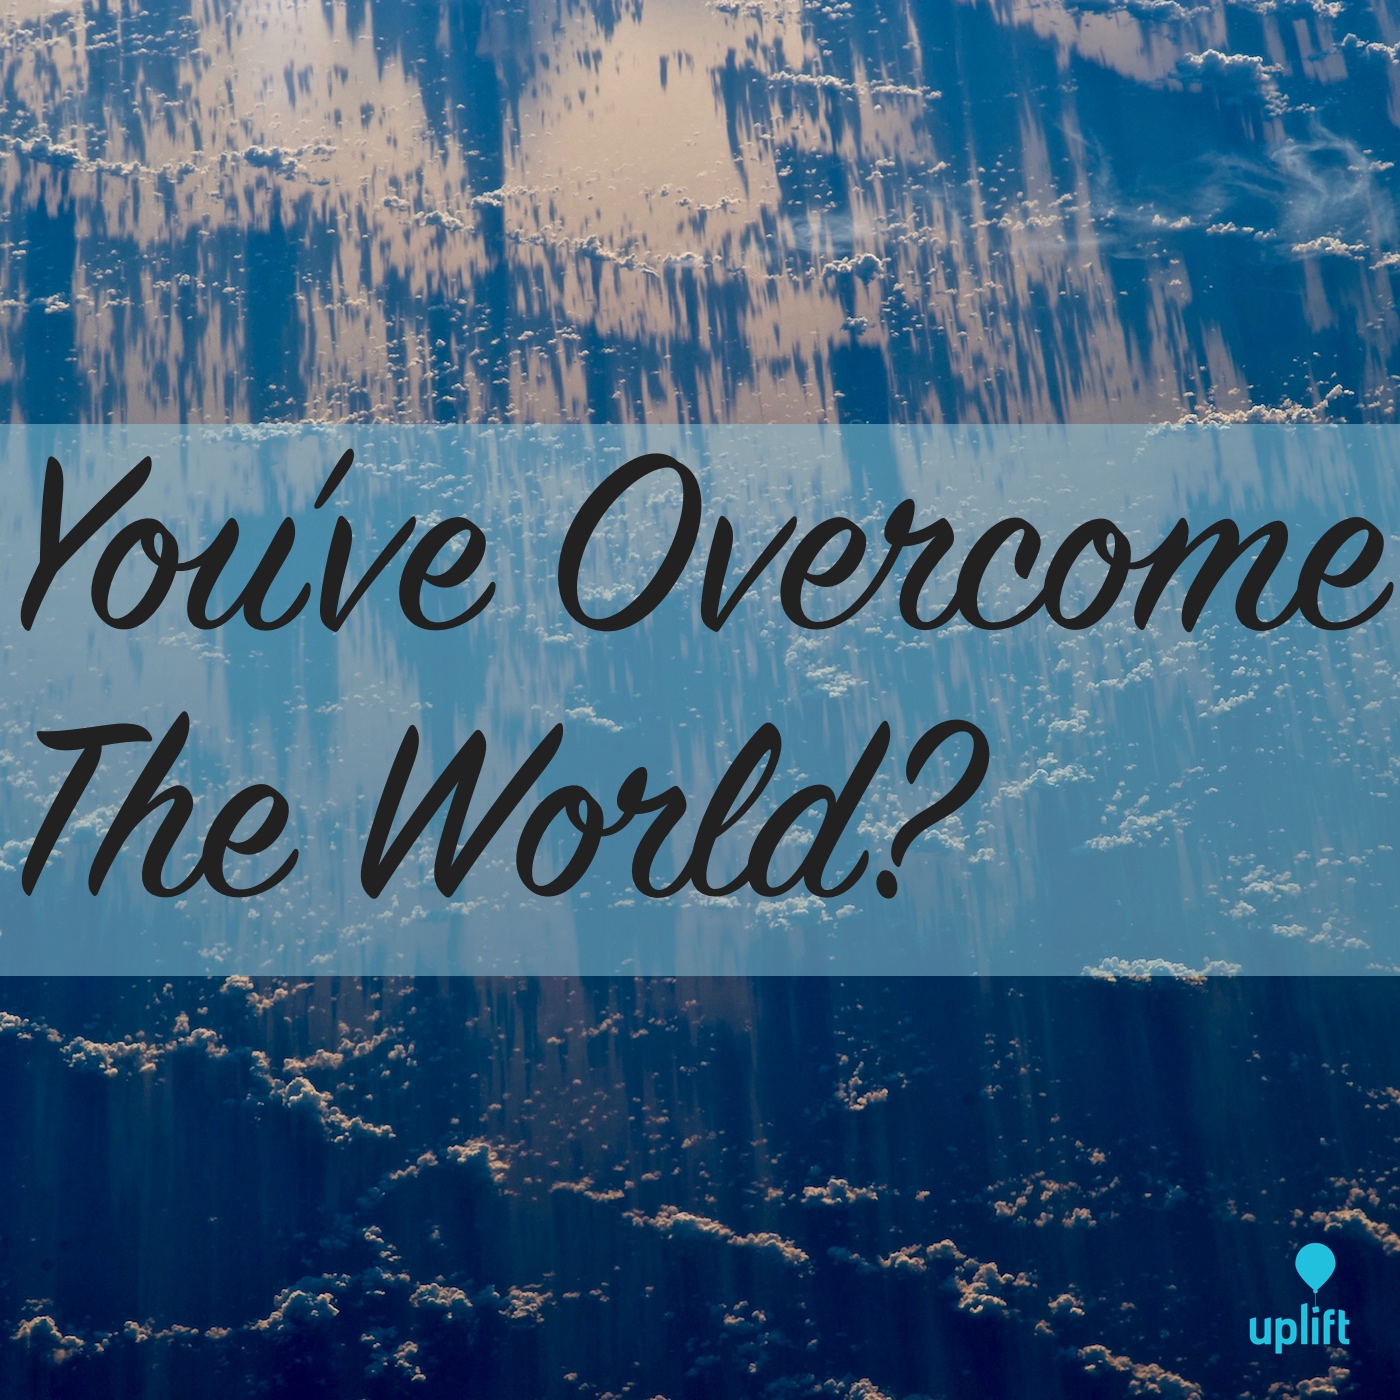 Episode 6: You’ve Overcome The World?